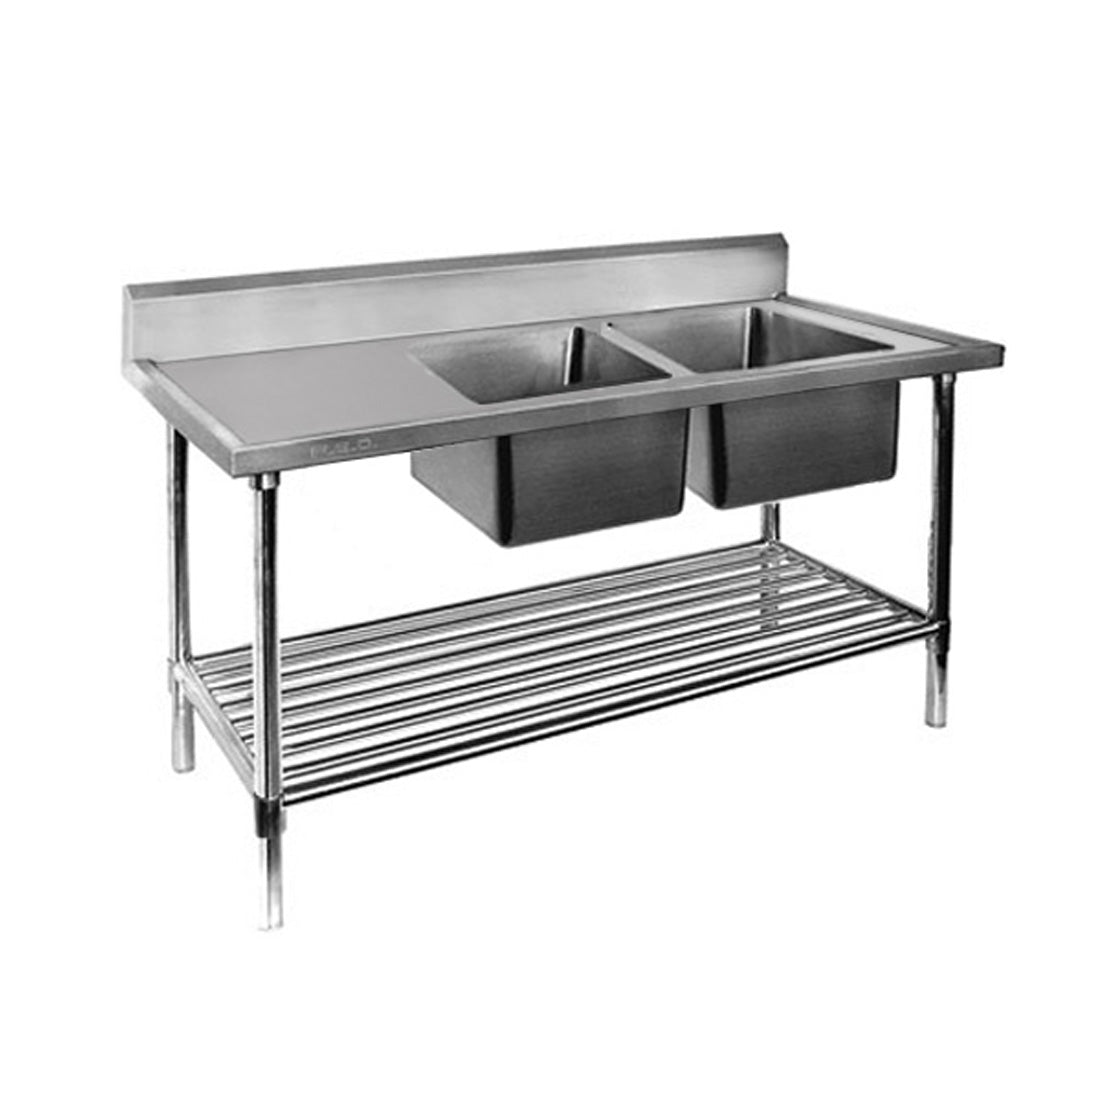 Modular Systems Double Right Sink Bench with Pot Undershelf 1500x700x900 DSB7-1500R/A